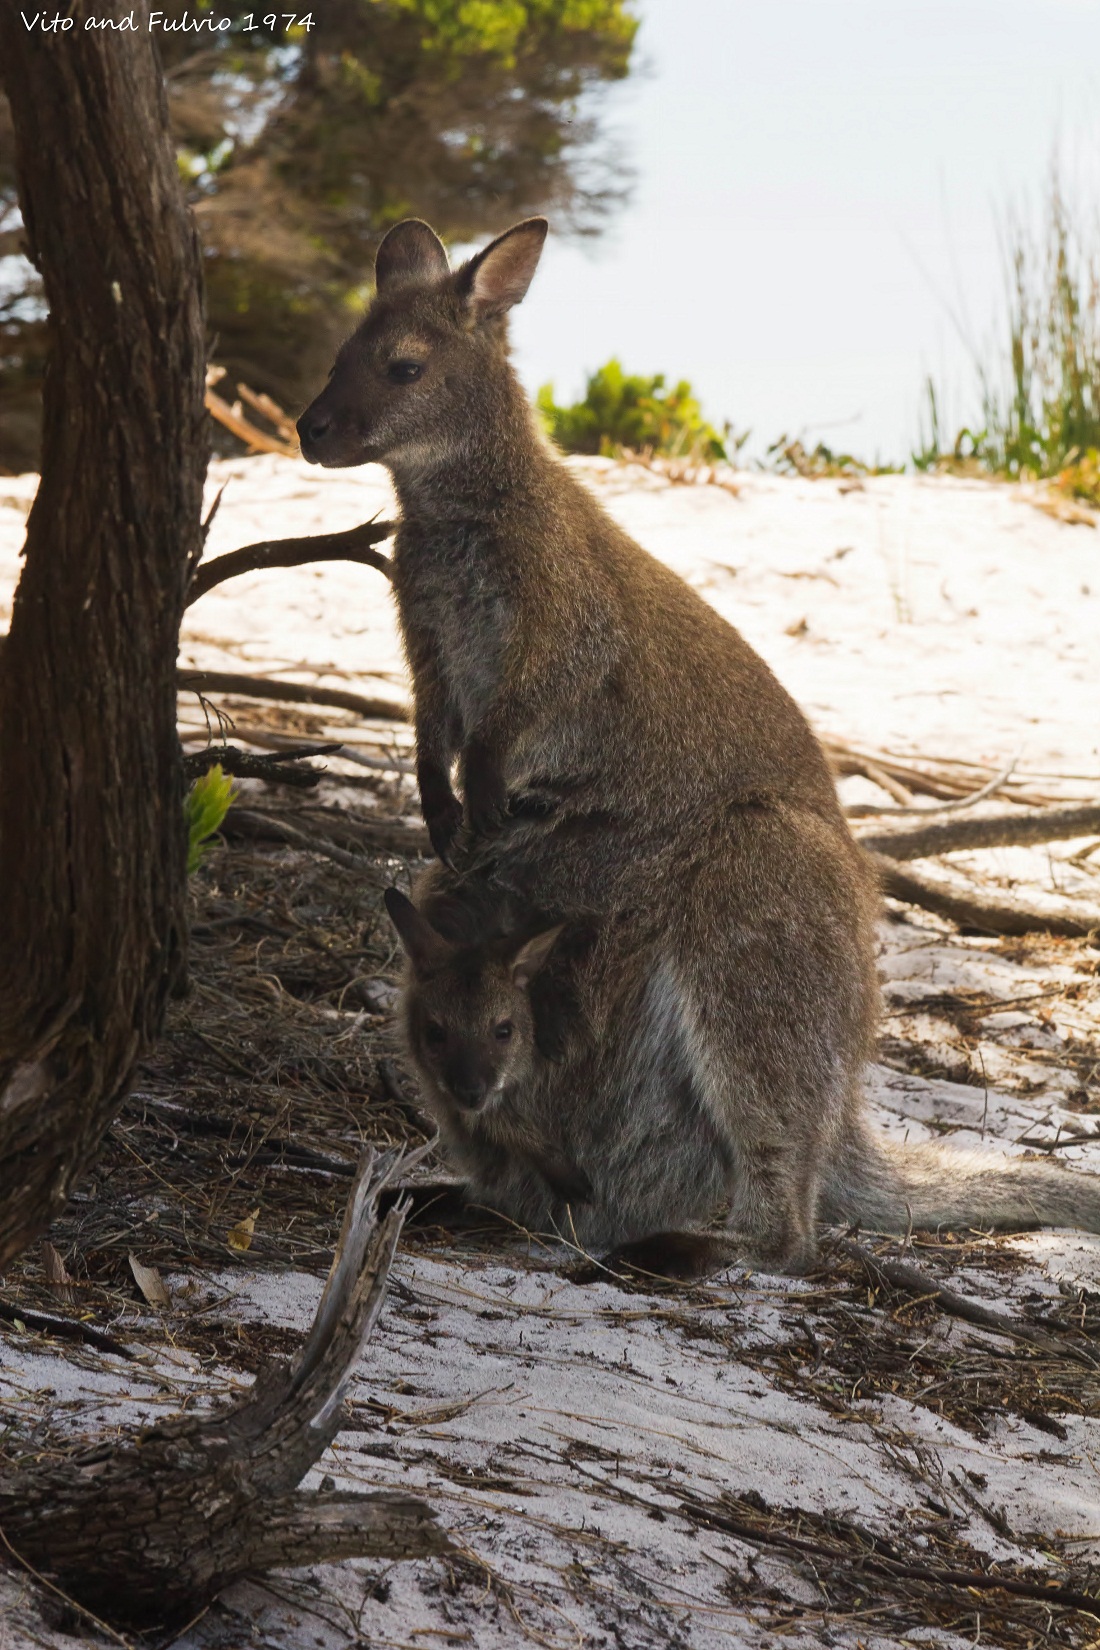 Wallaby Mom and son !!...